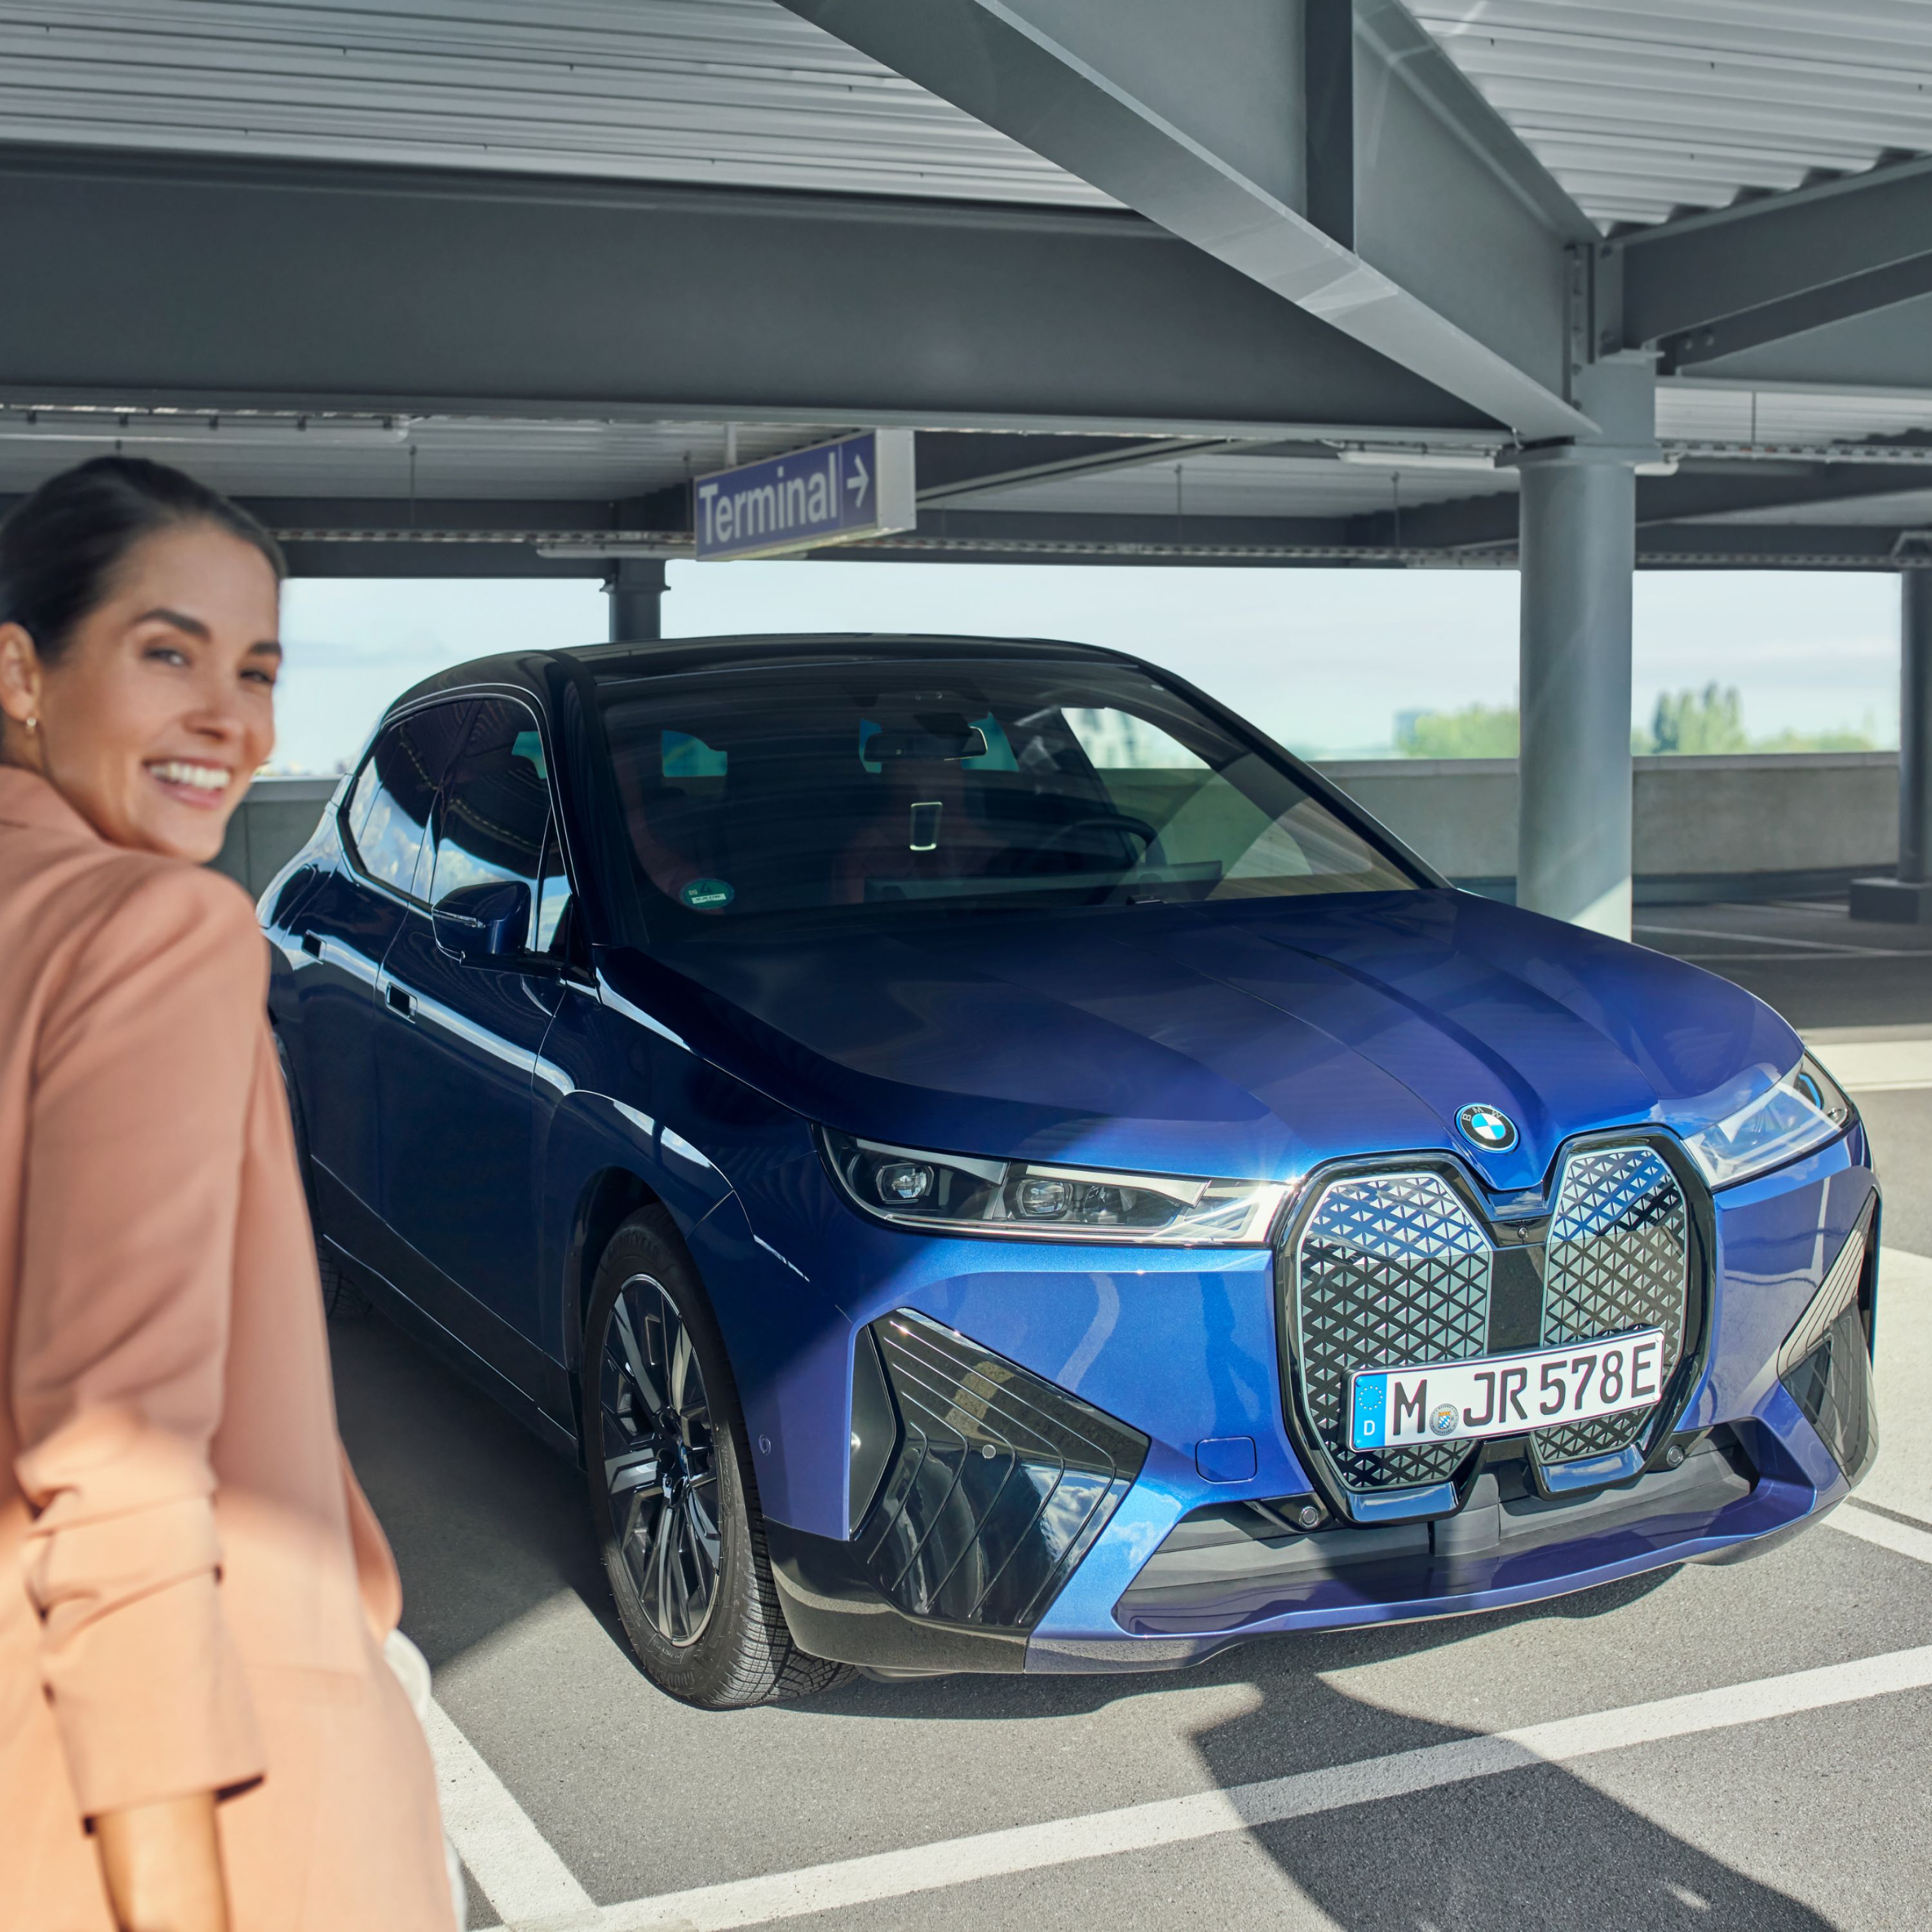 BMW electric cars costs